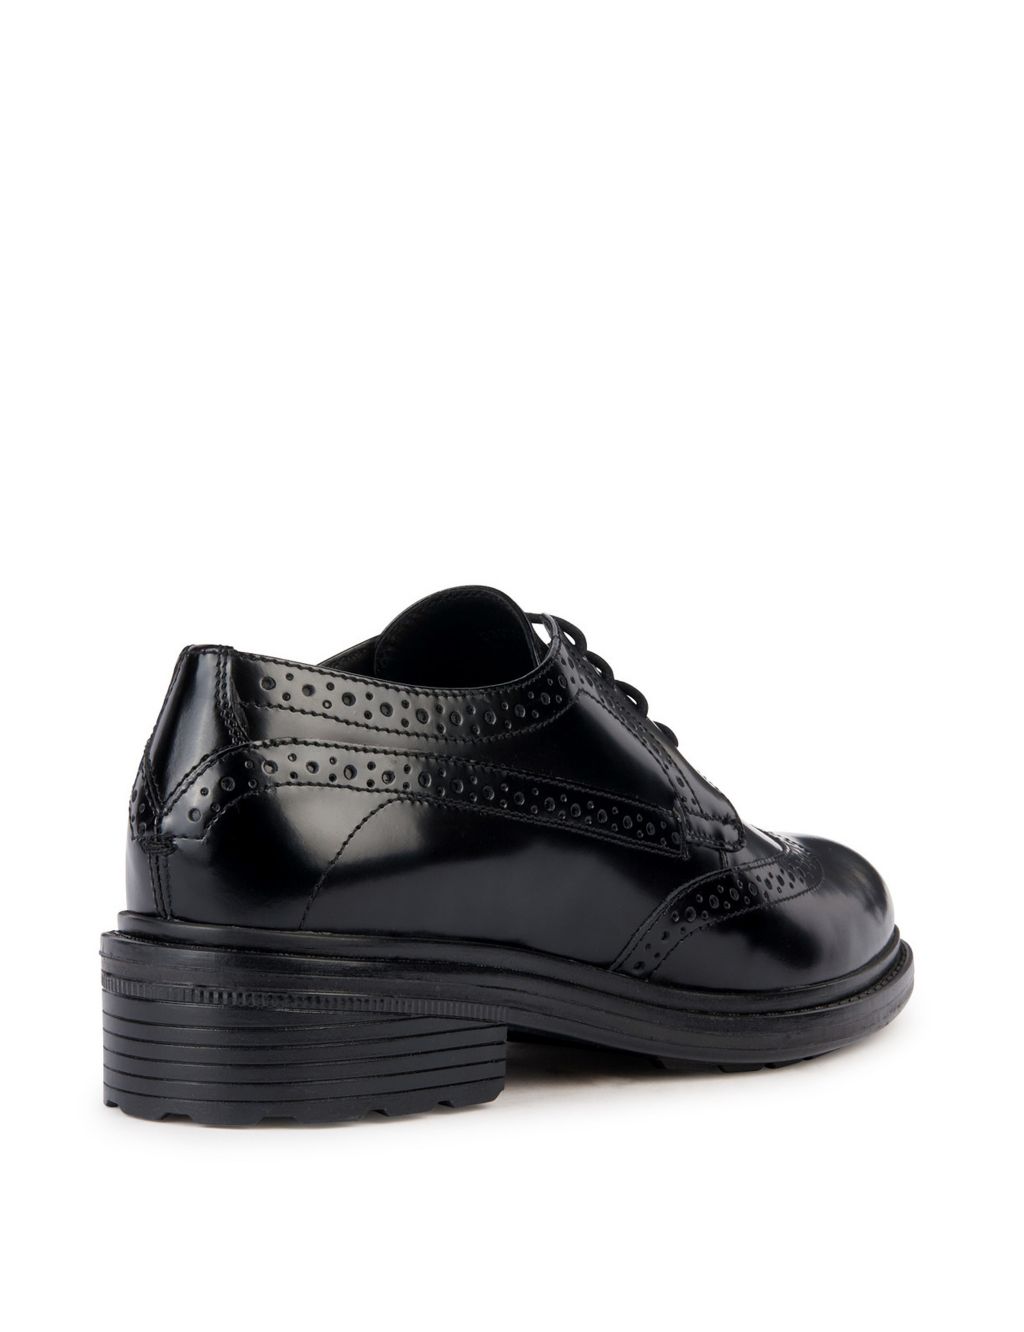 Leather Lace Up Brogues image 4